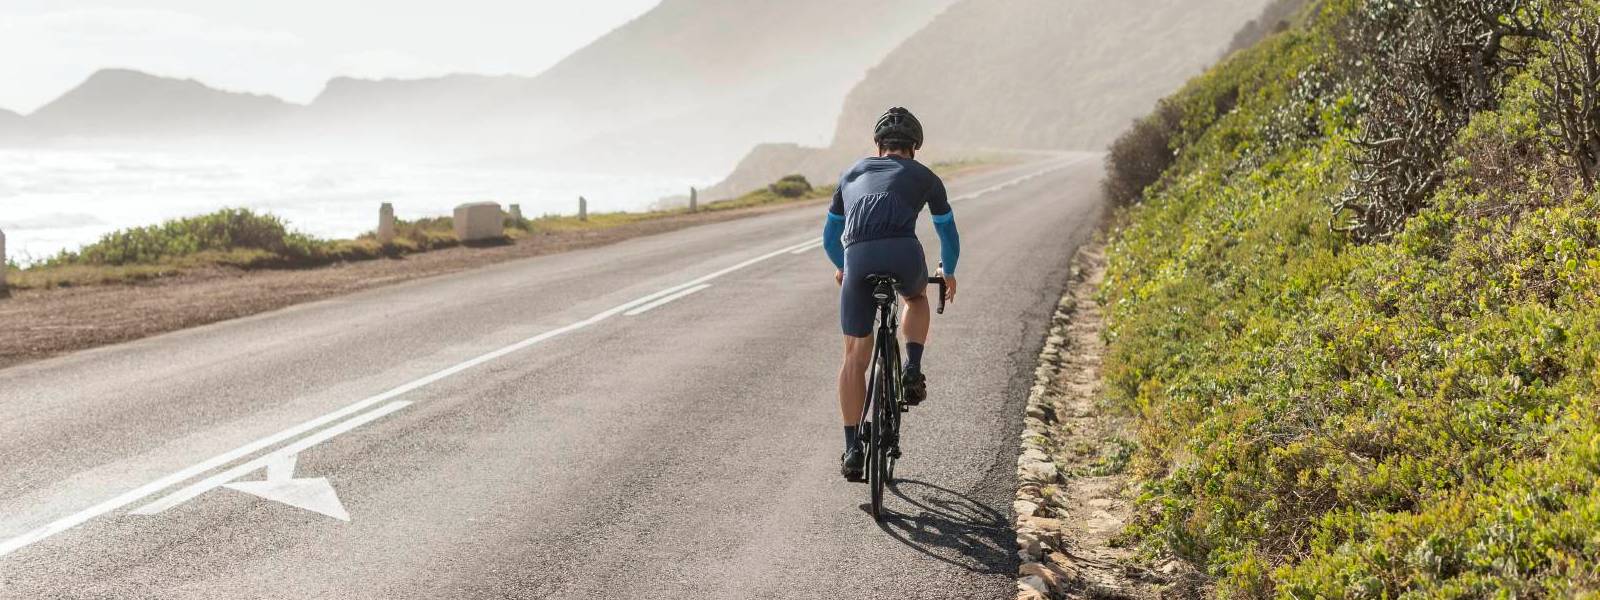 Cyclists wear blue arm sleeves and drives on a street on the slope with a sea view